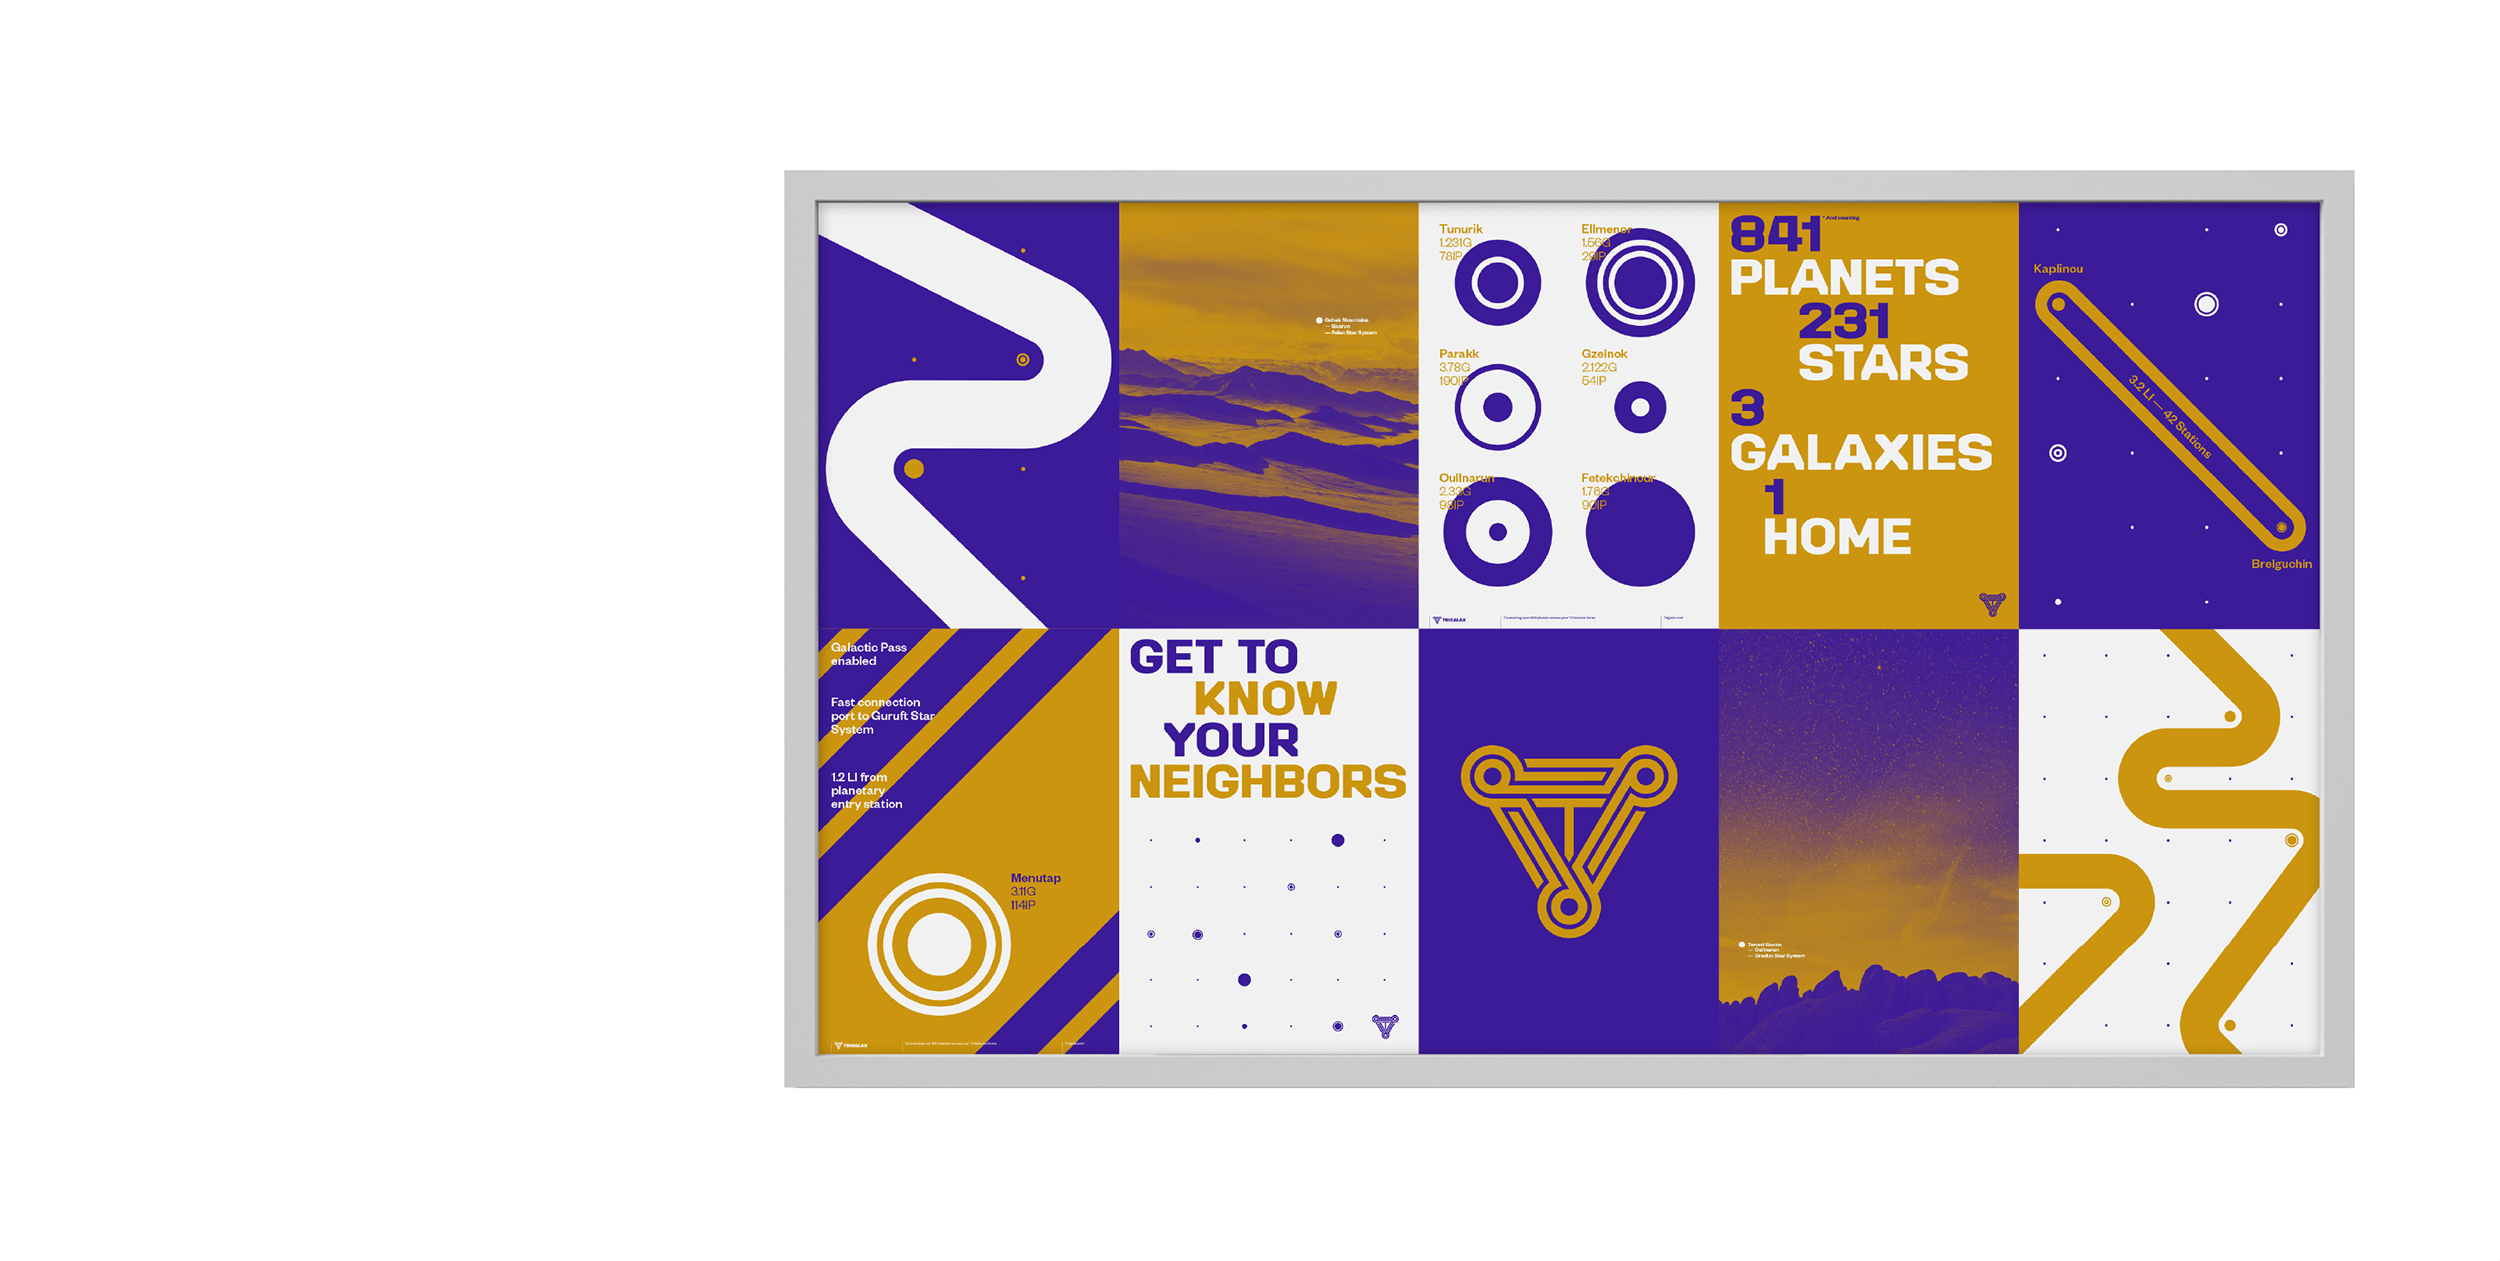 17_Trigalax-Space-Branding-Campaign-Posters-System